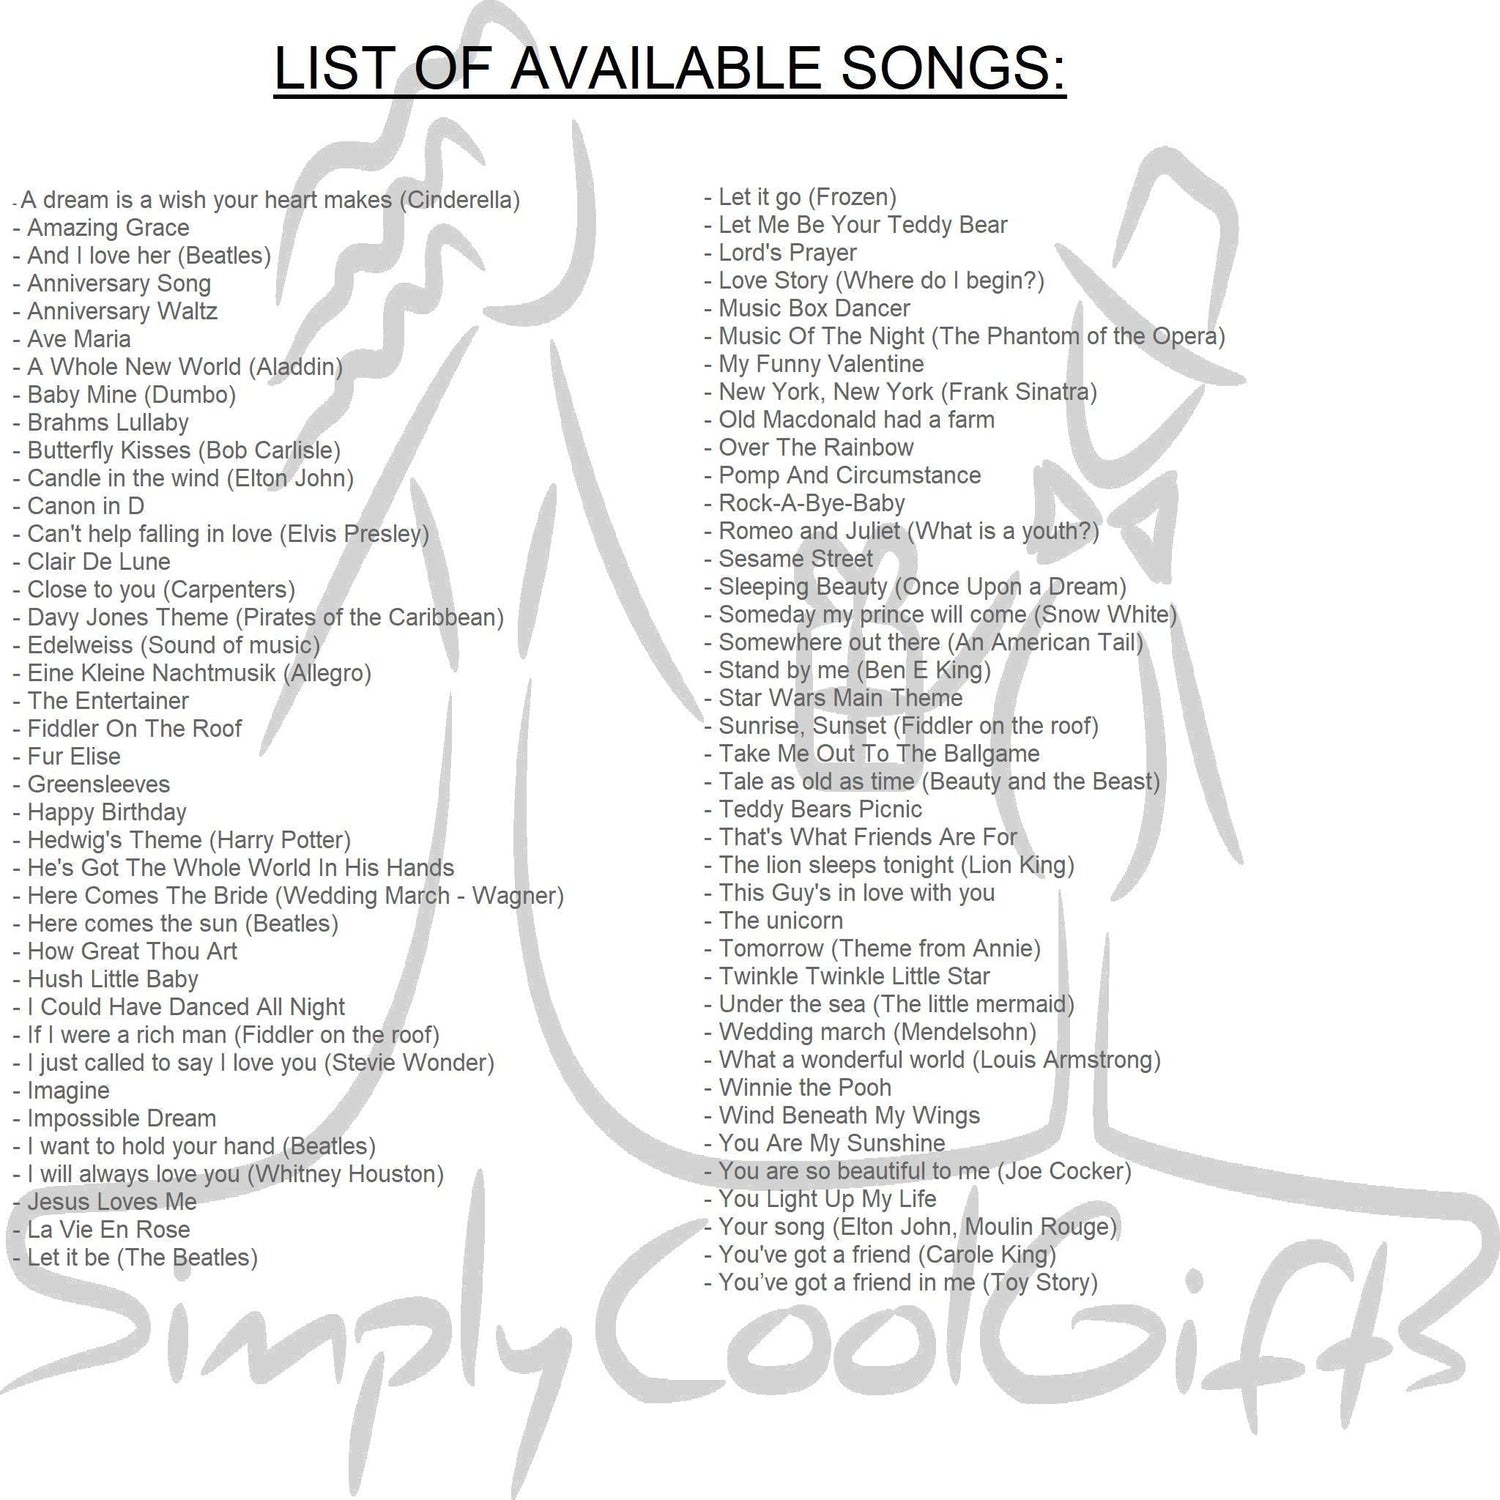 list of song for music box to choose from, CLose to you, Happy Birthday, Here comes the sun, 